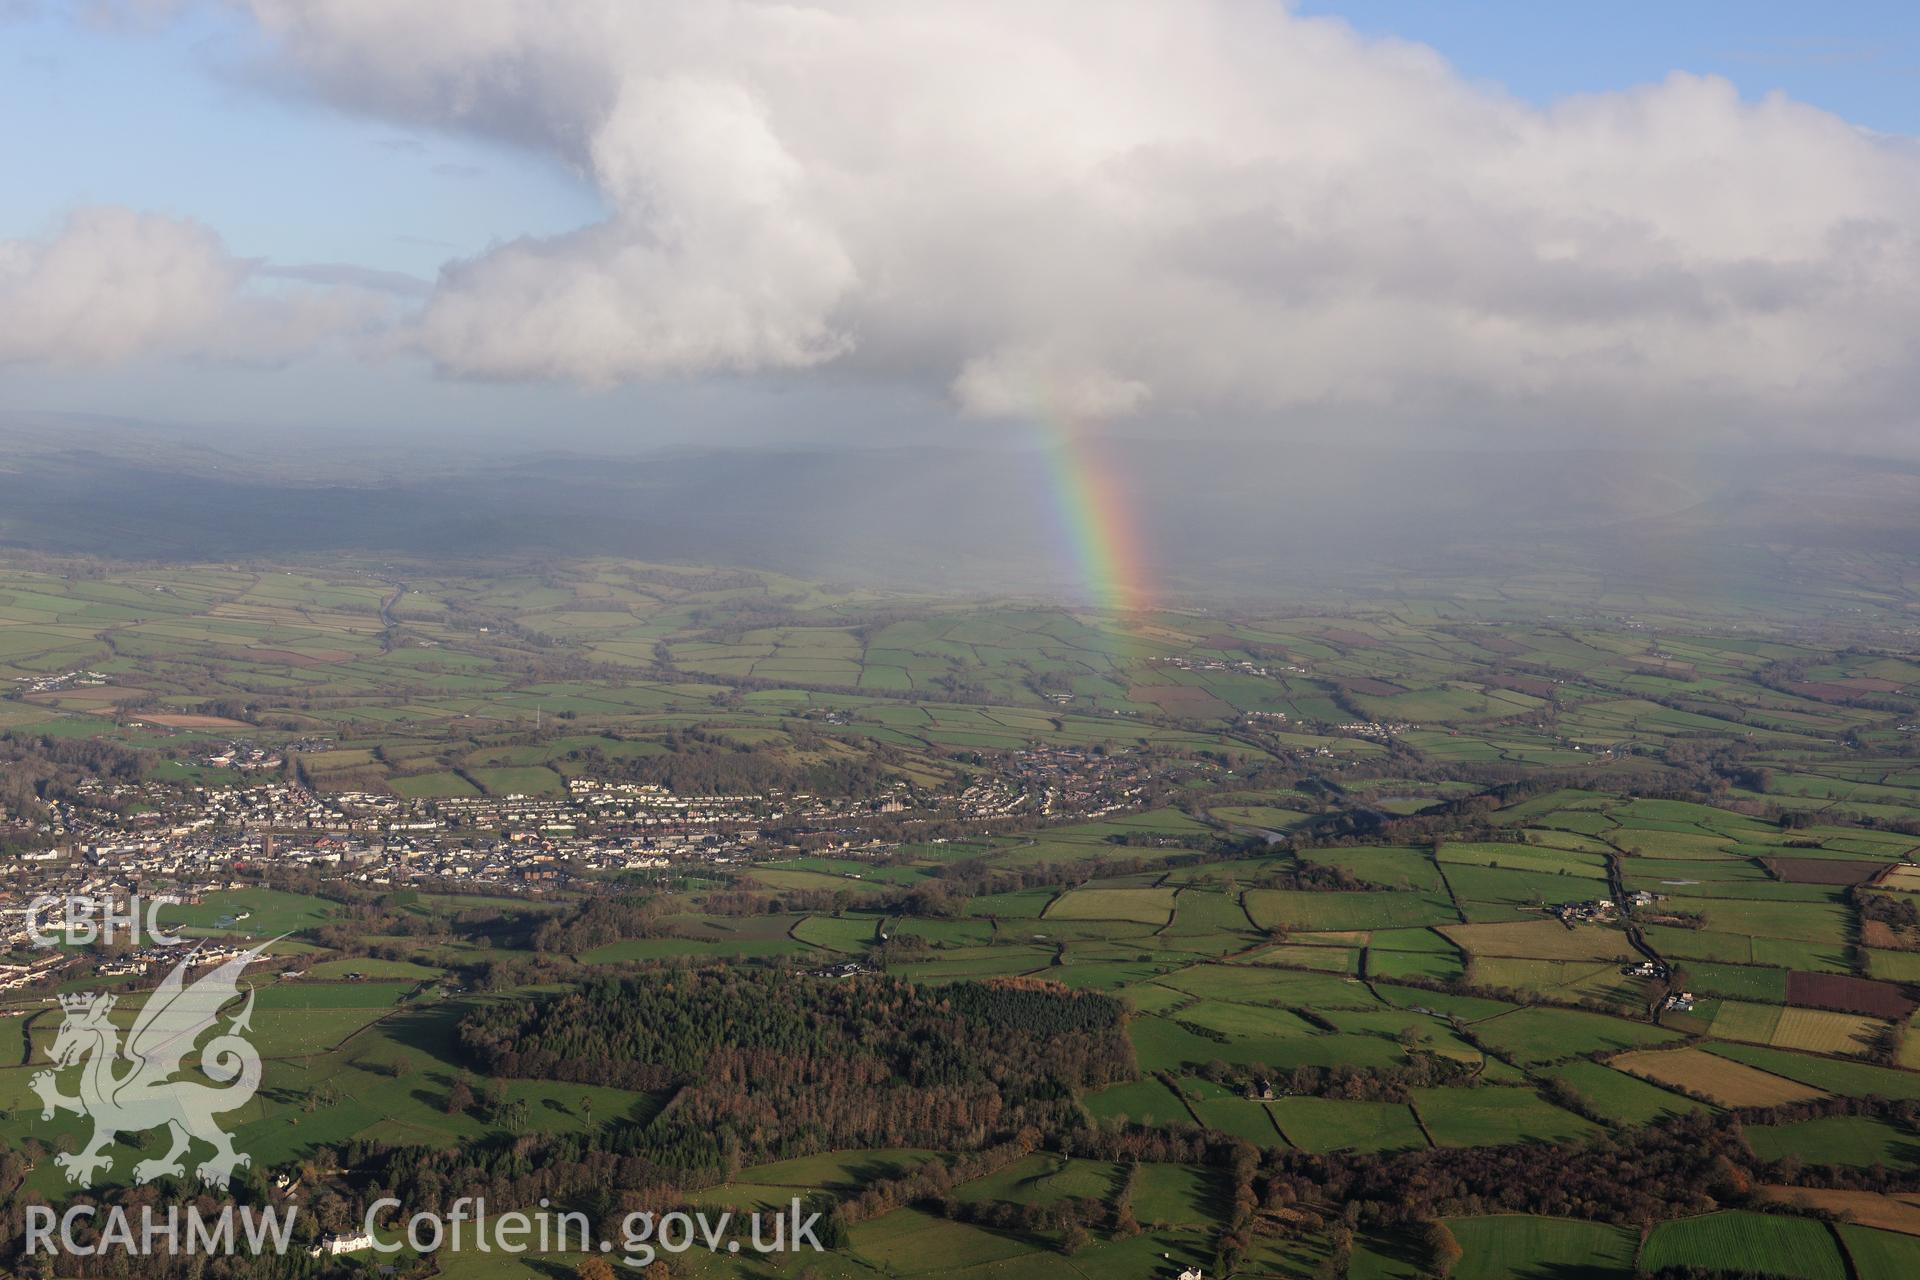 RCAHMW colour oblique photograph of Brecon, distant townscape from south-west over Held Wood, with rainbow. Used in: Musson & Driver 2015, Above Brecknock, page 126. Taken by Toby Driver on 23/11/2012.